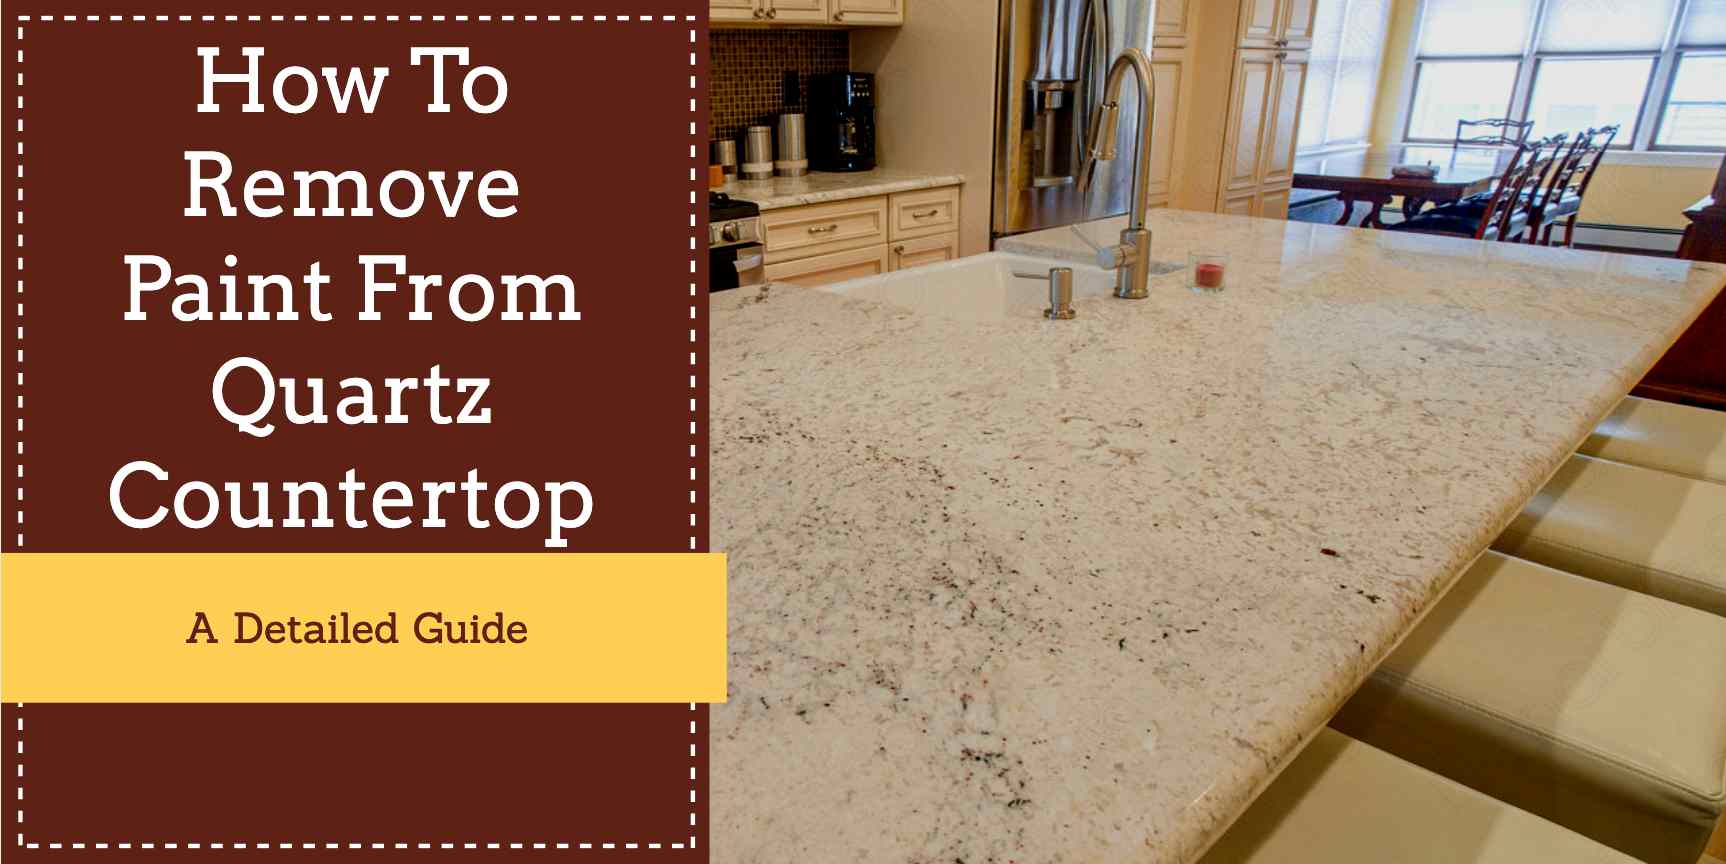 How To Remove Paint From Quartz Countertop